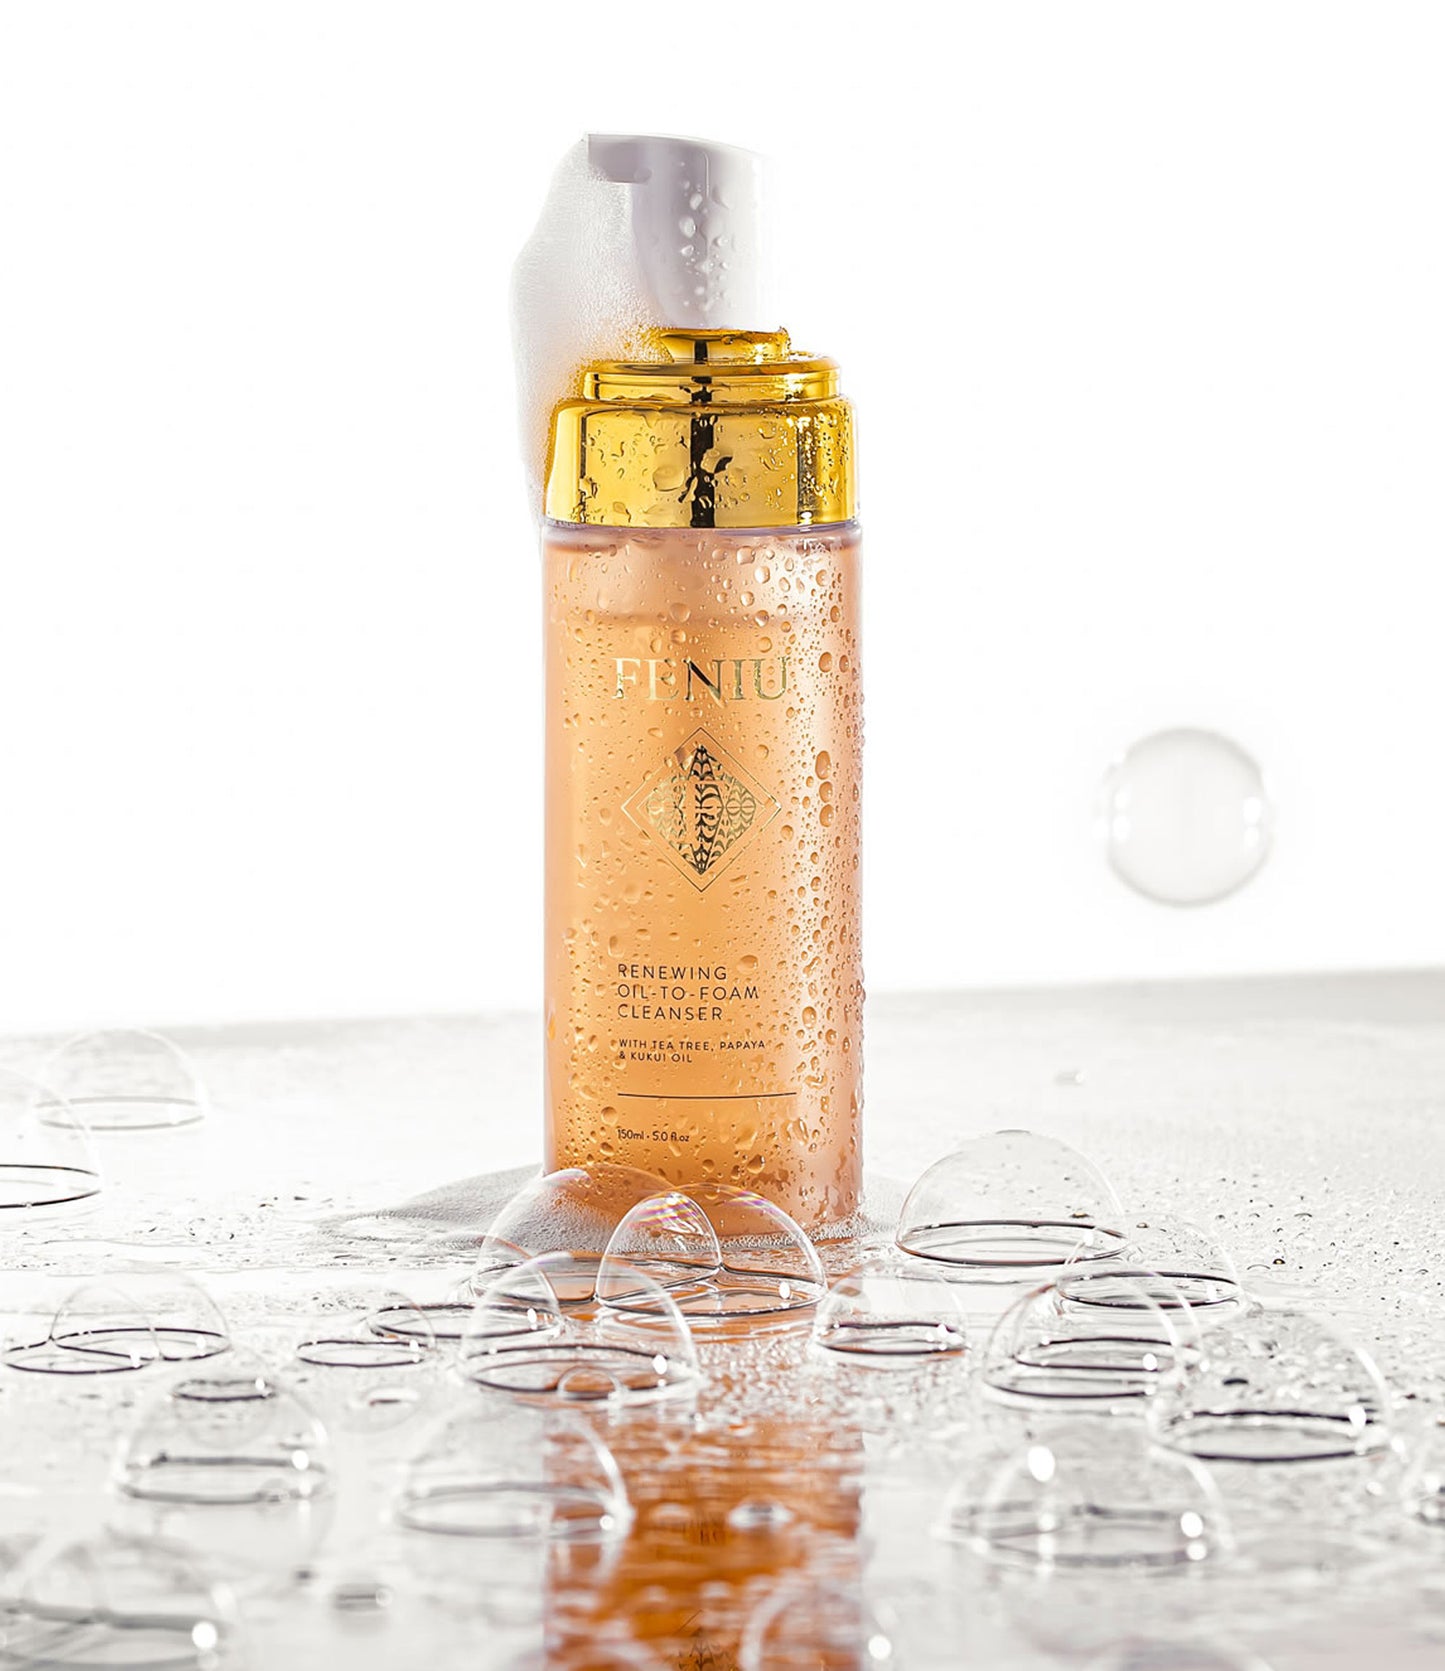 Crystal Bronze Shimmering Body Oil - Pacifica